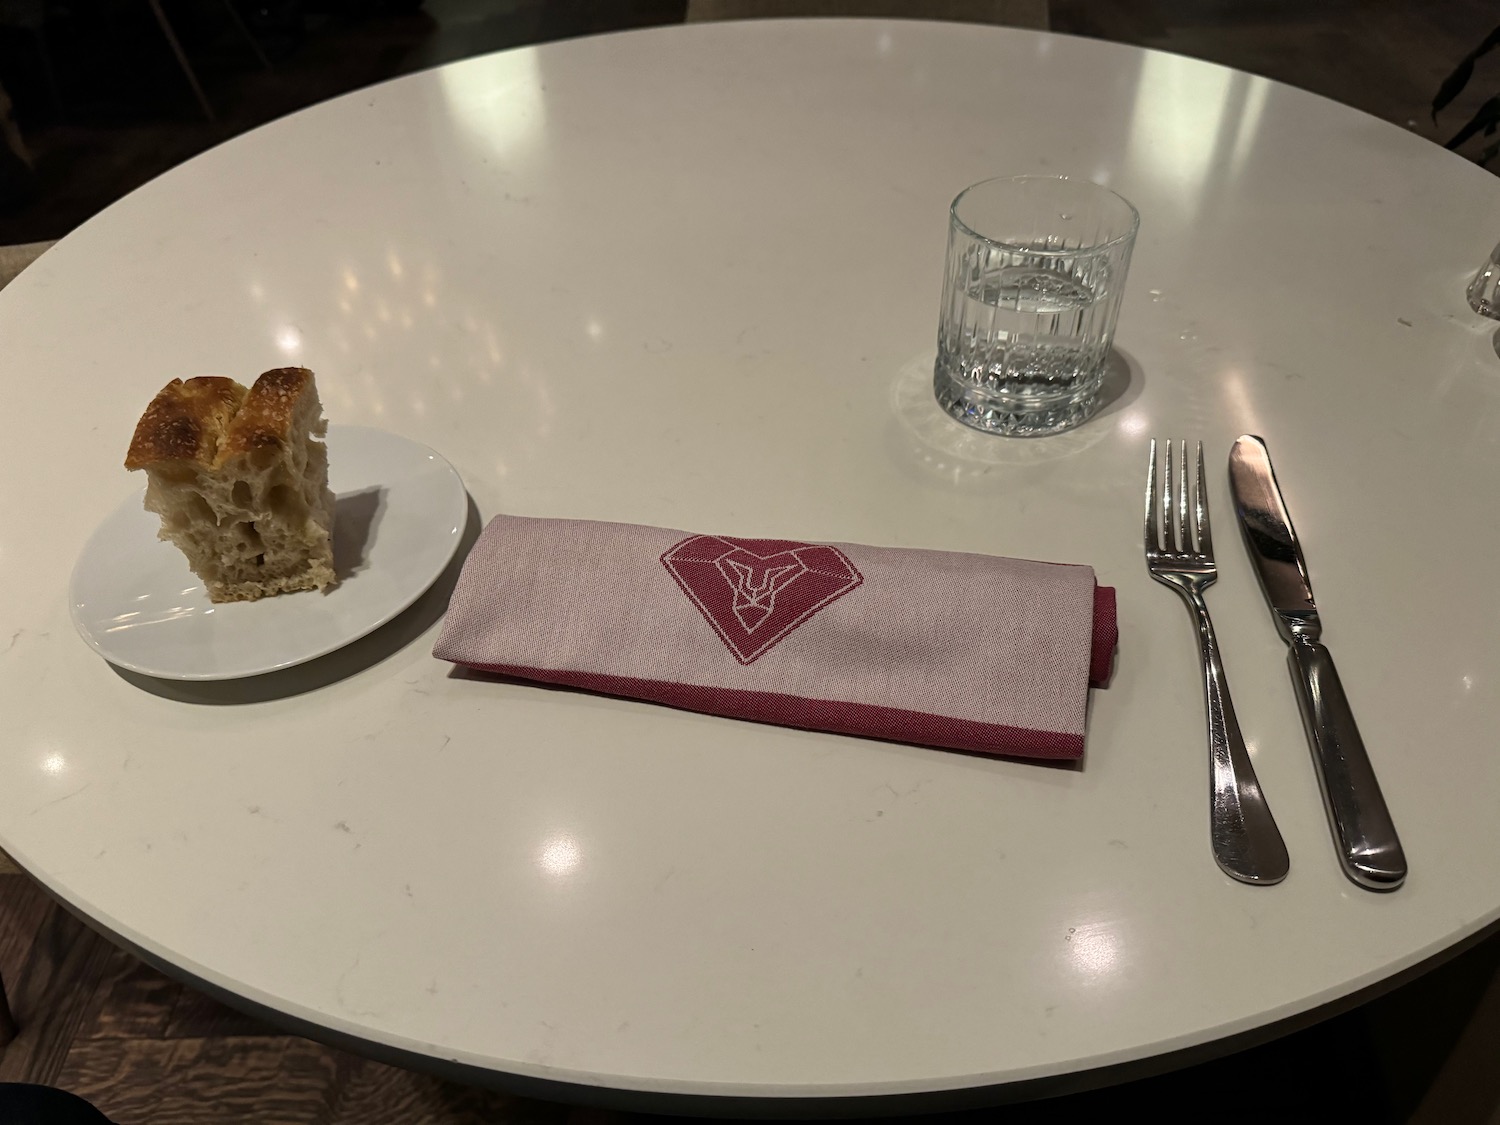 a plate with a piece of bread on it and a napkin and fork on a table